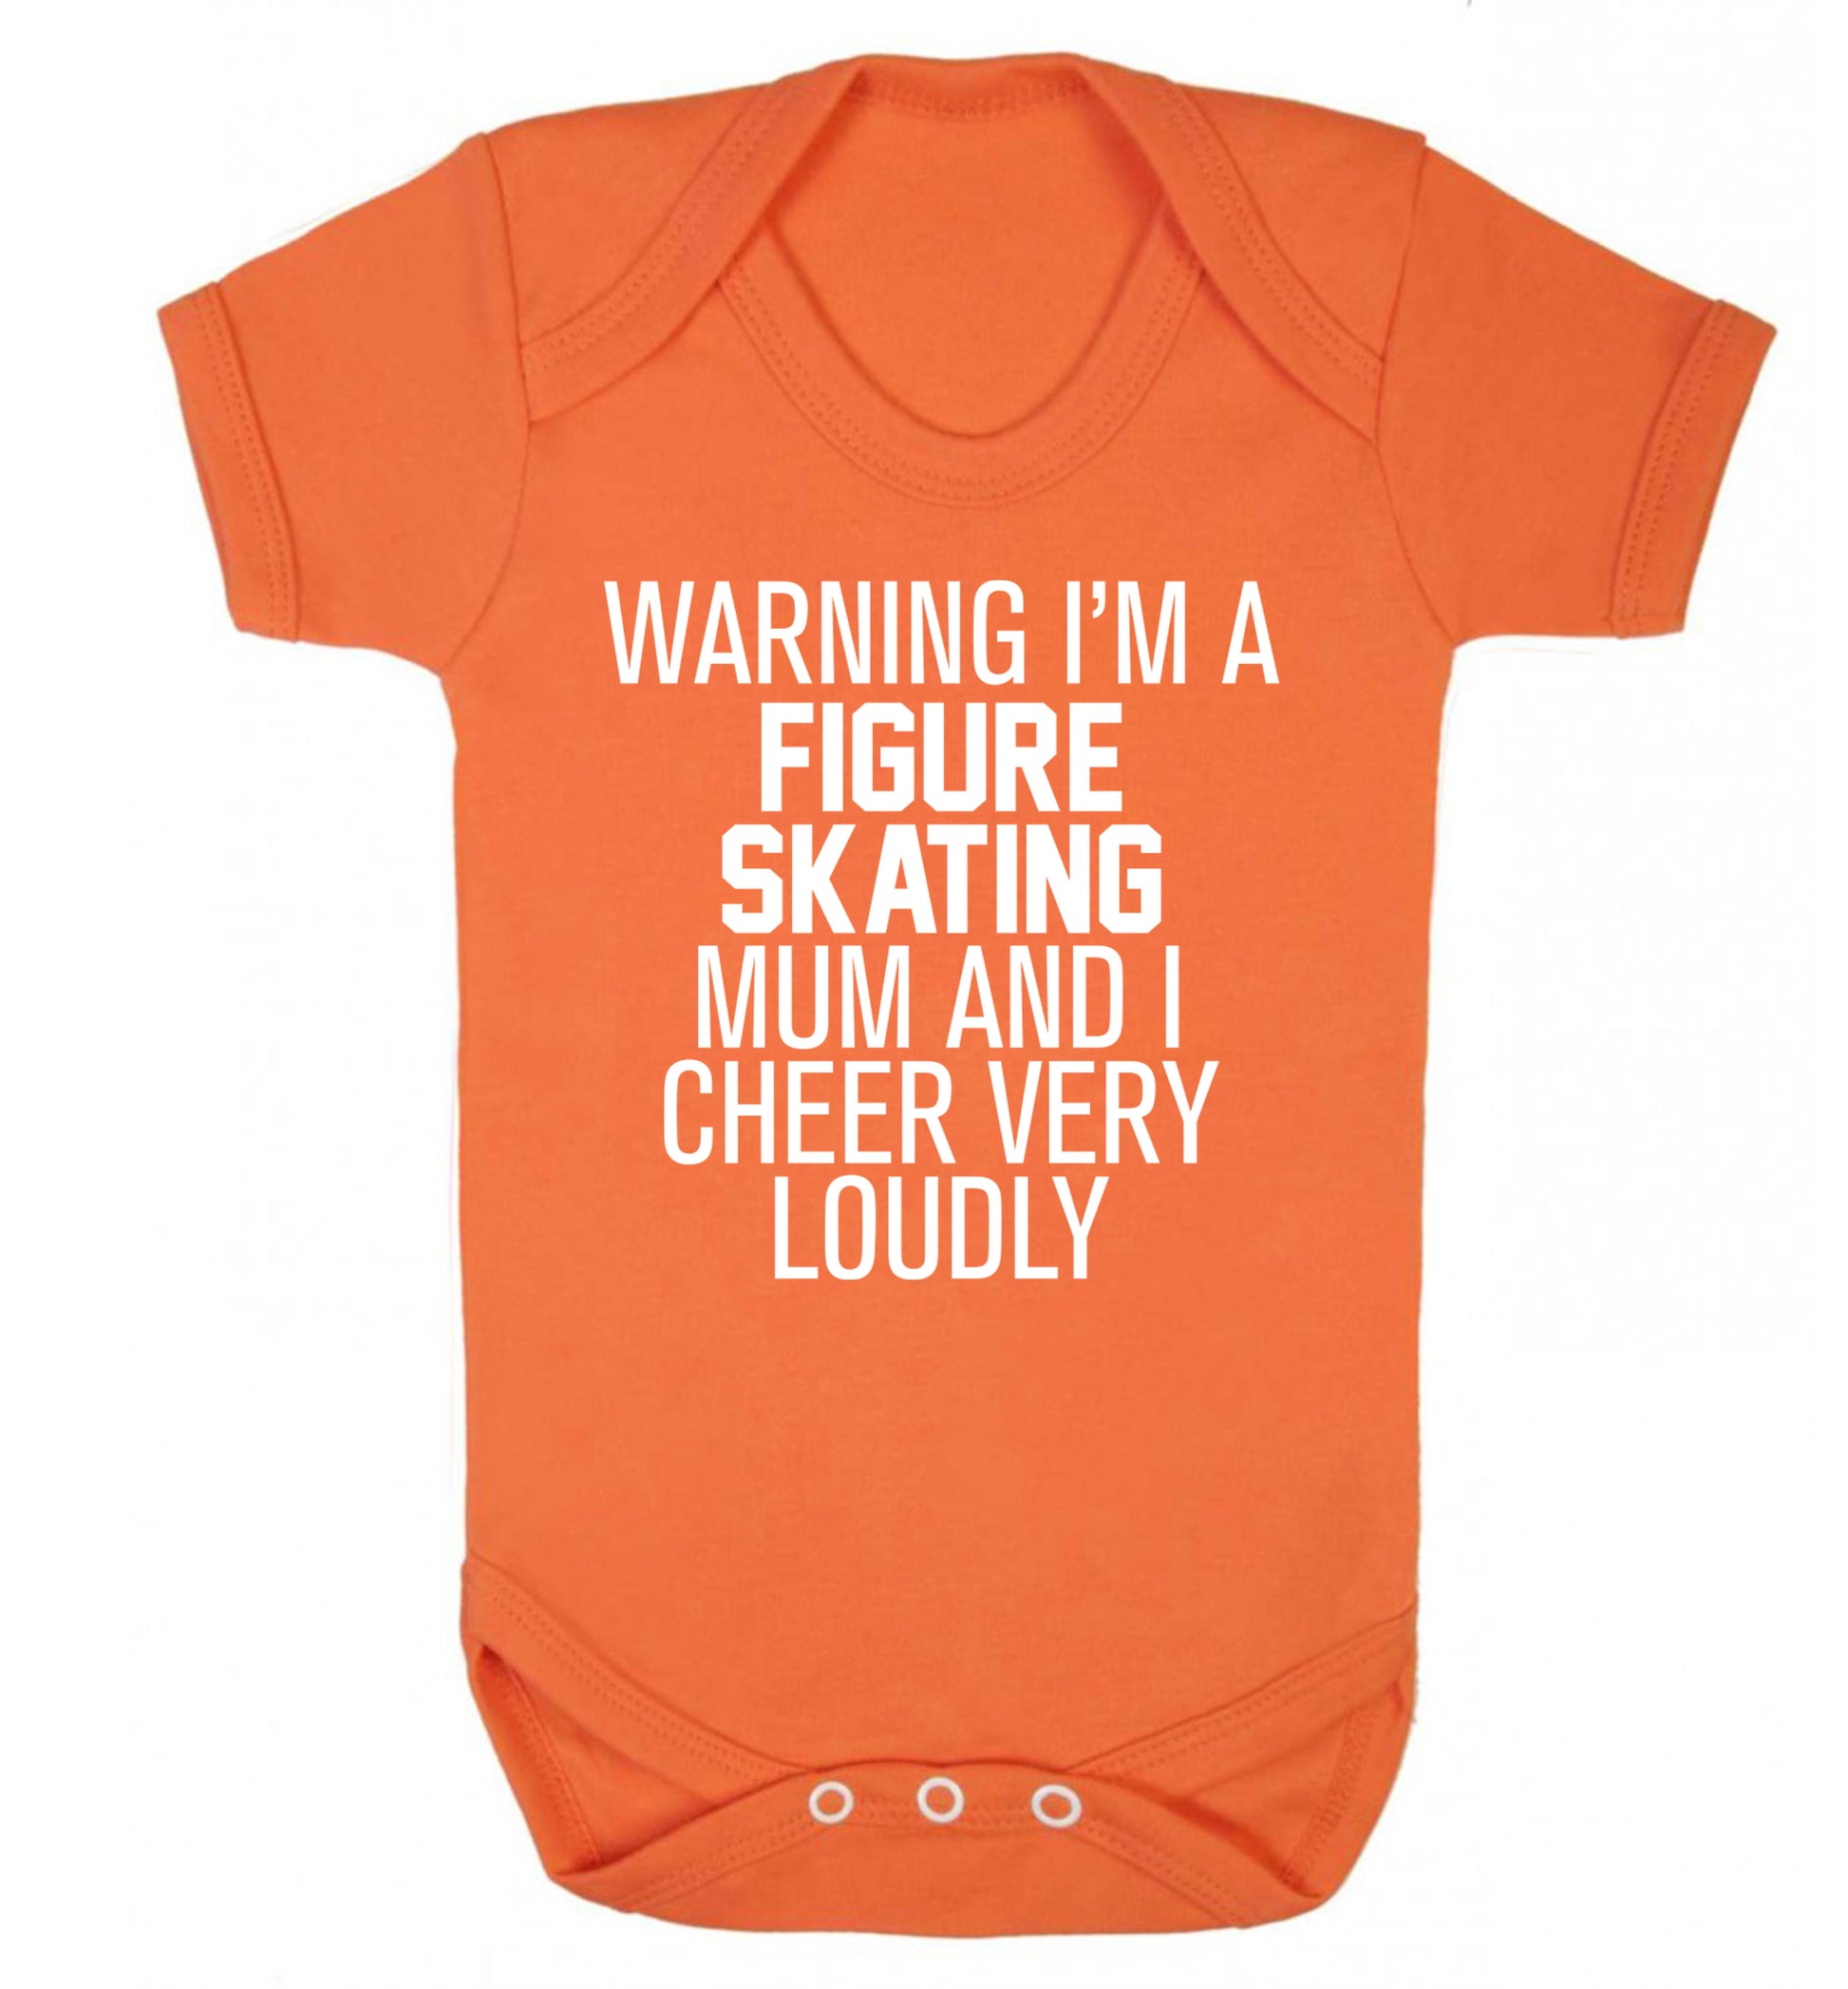 Warning I'm a figure skating mum and I cheer very loudly Baby Vest orange 18-24 months